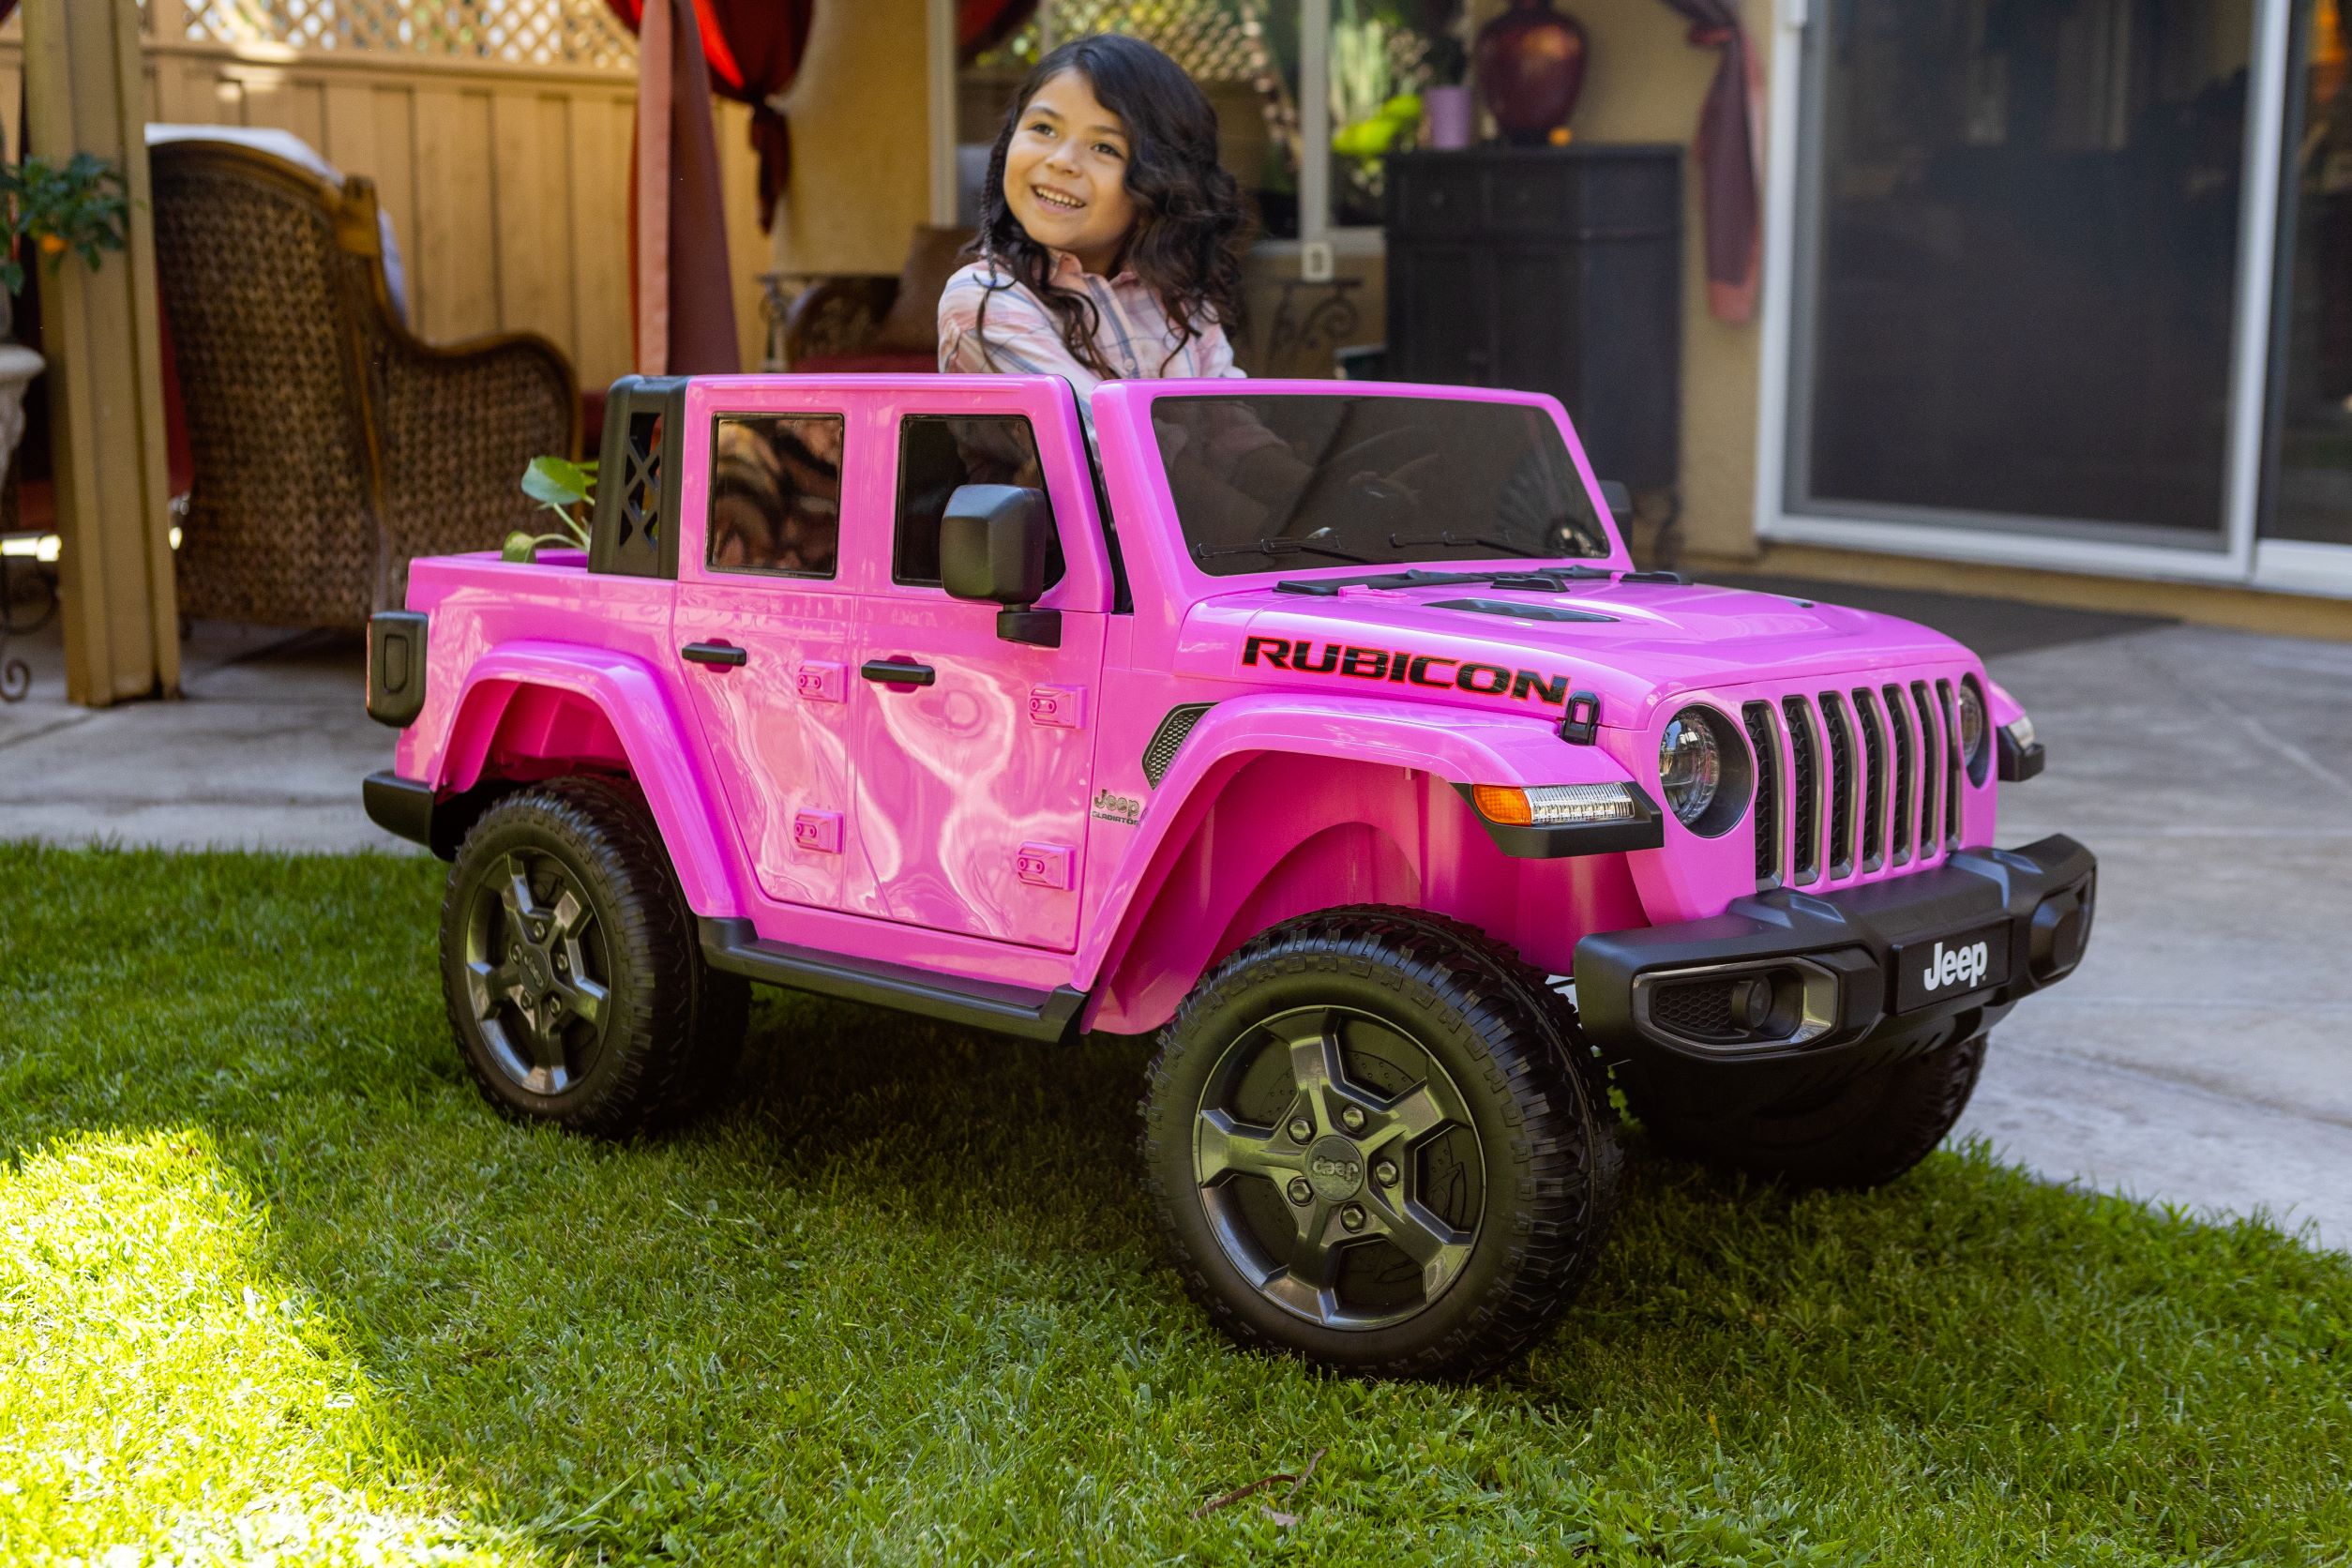 12V Jeep Gladiator Rubicon Battery Powered Ride-on by Hyper Toys, 2-Seater, Pink, for a Child Ages 3-8, Max Speed 5 mph - image 3 of 13